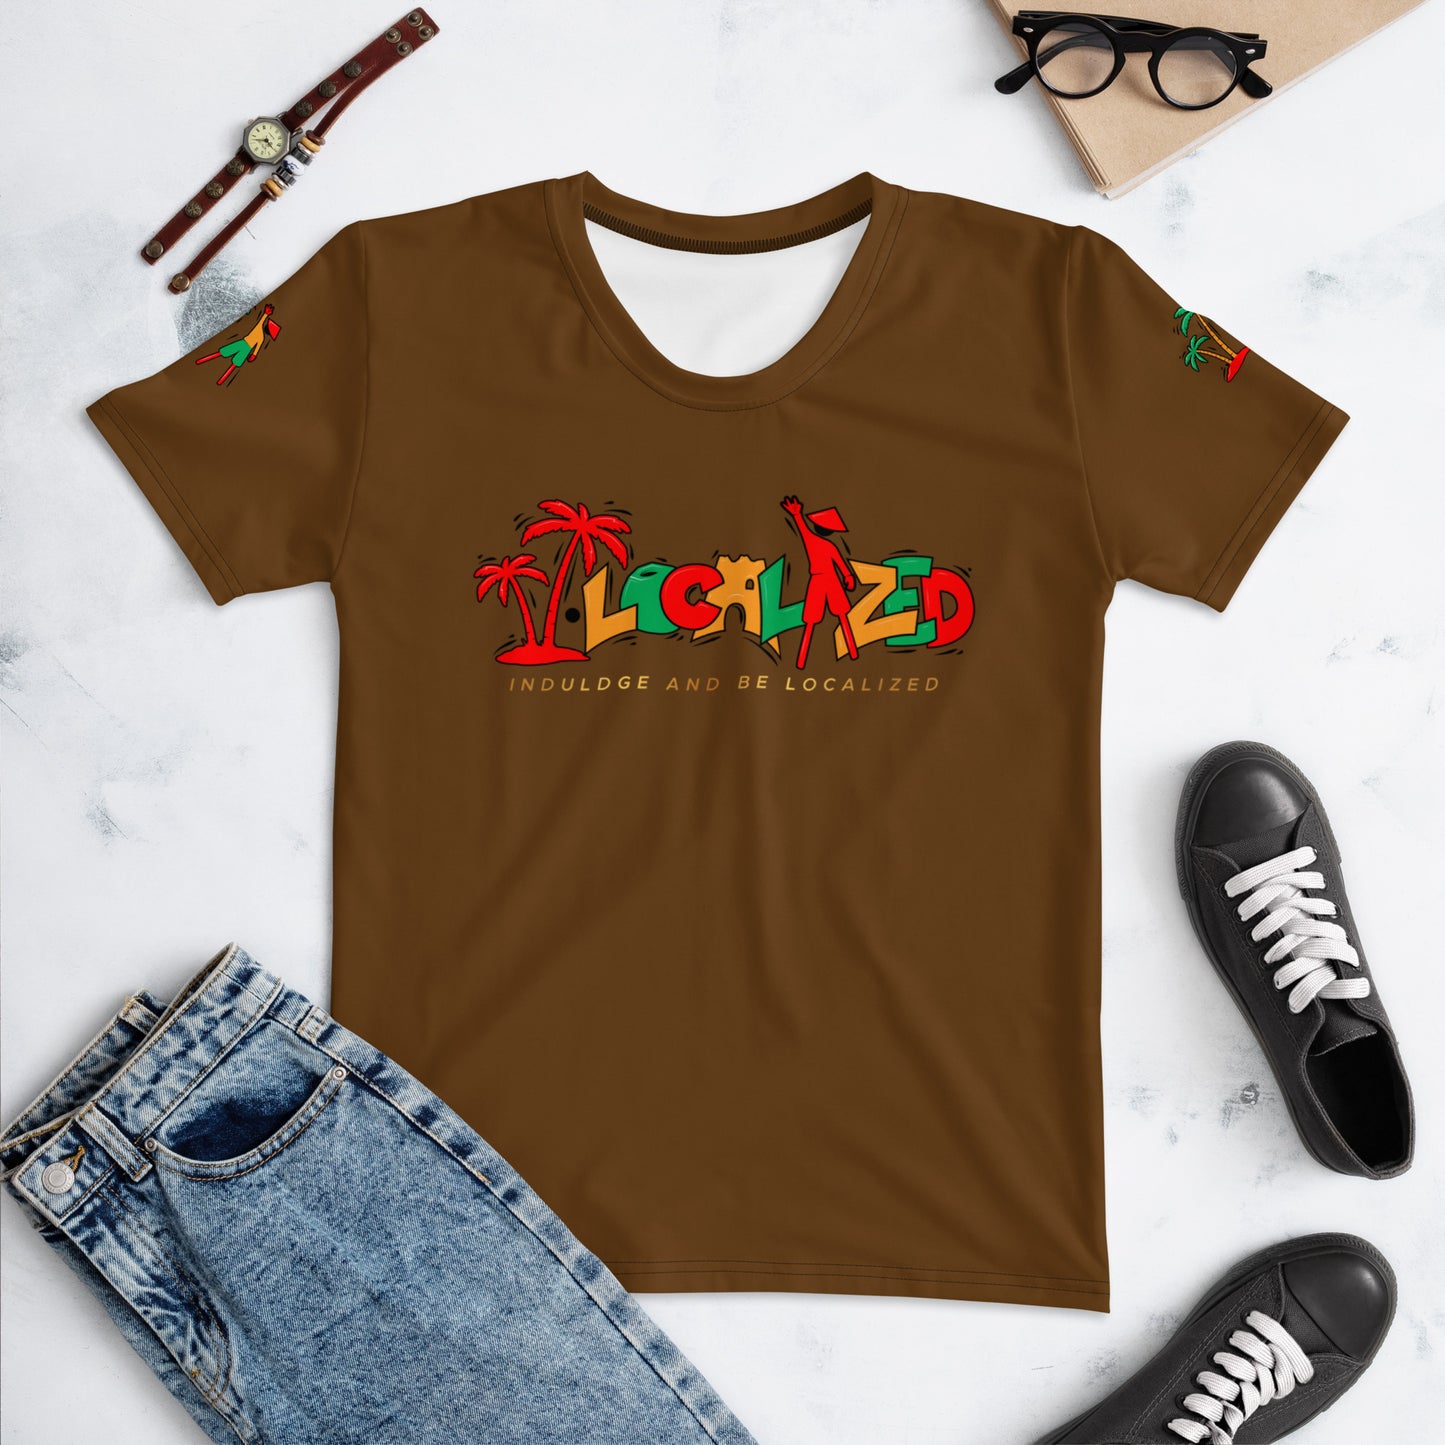 Brown V.localized (Ice/Gold/Green) Womens Dry-Fit T-Shirt